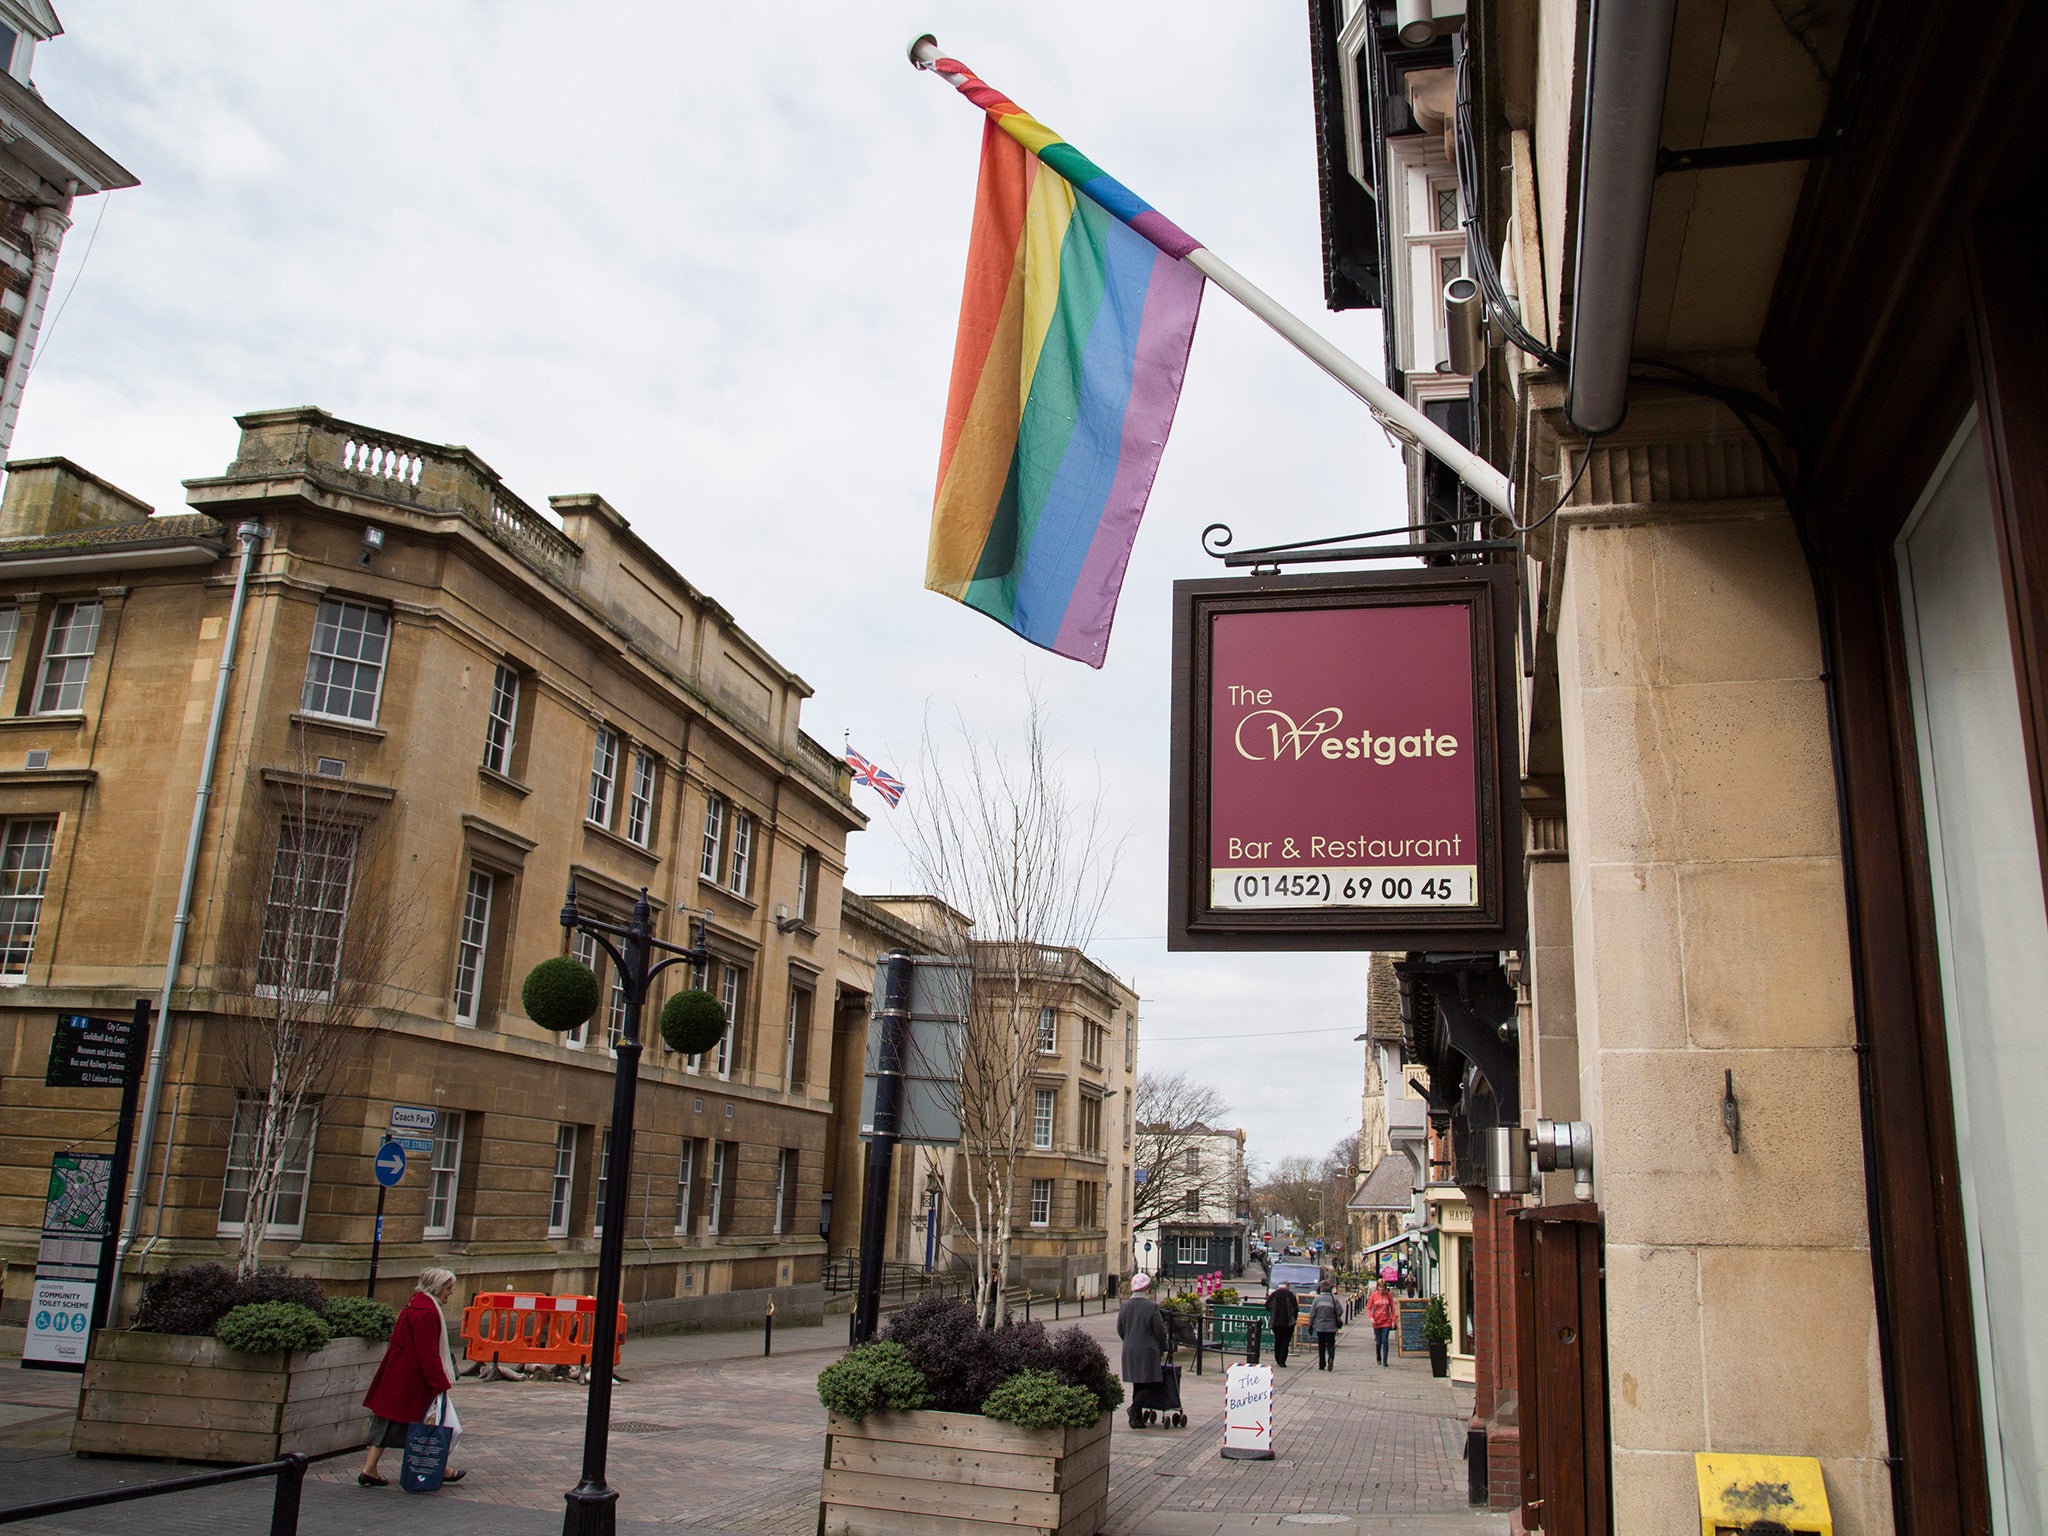 The Westgate, a gay pub in the centre of Gloucester which played host to drag queens, has closed